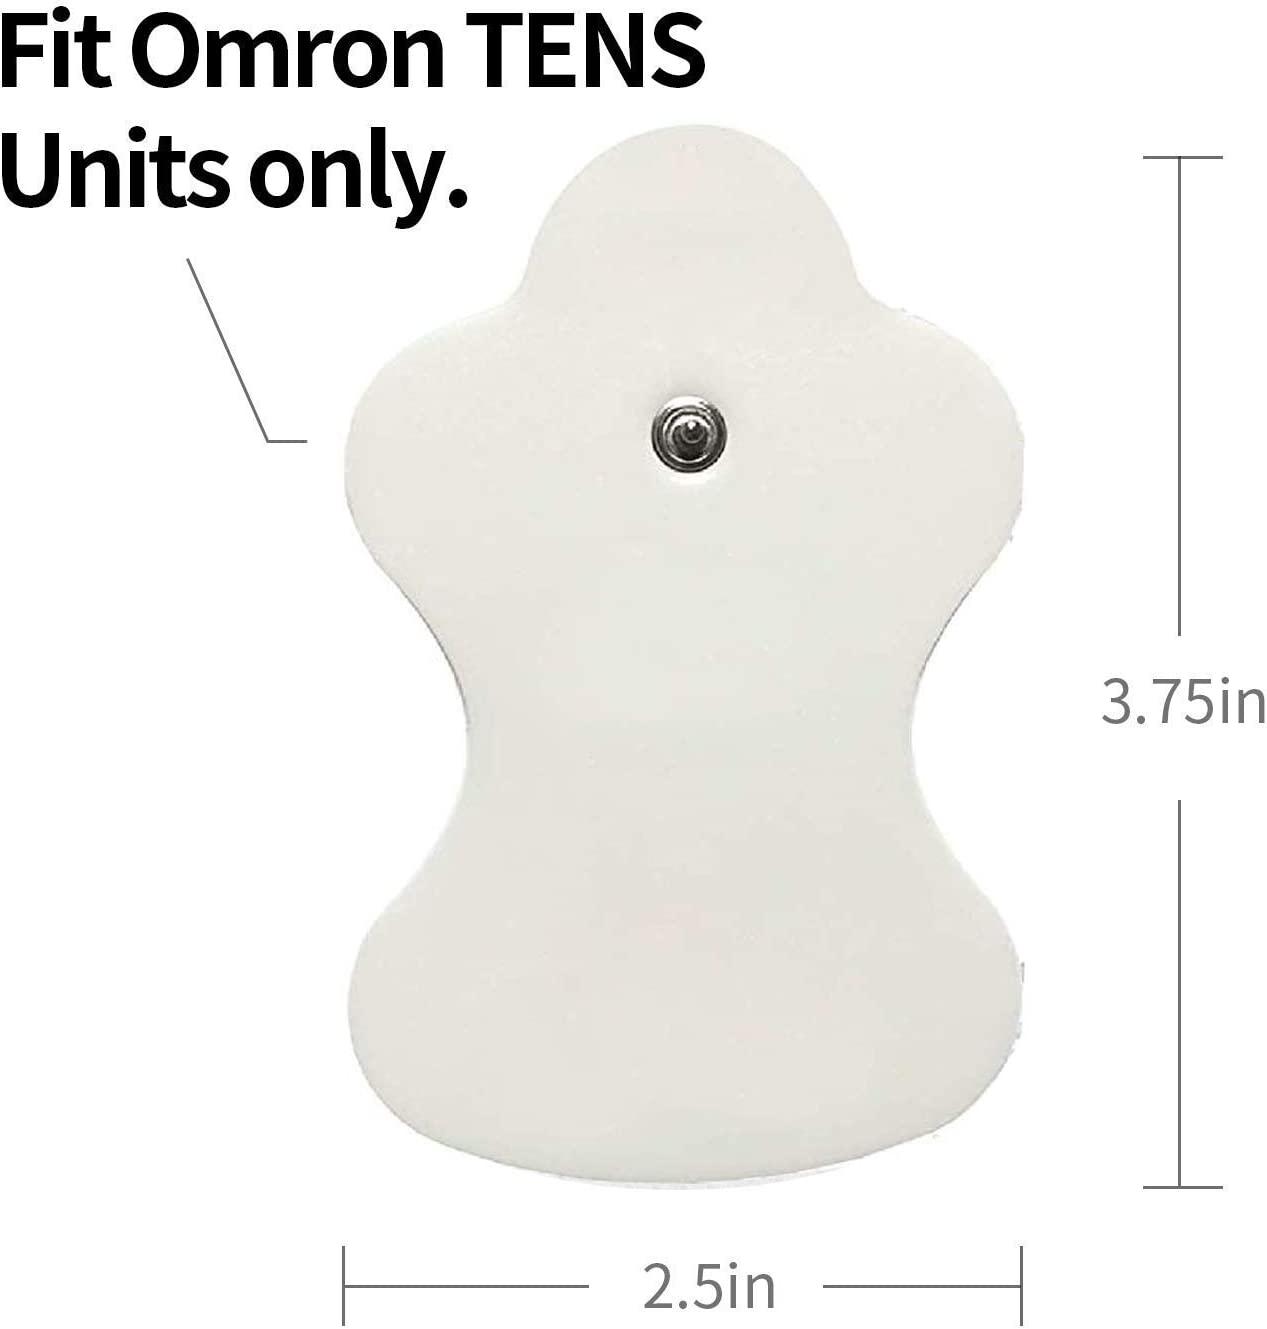 Omron Electrotherapy TENS Unit Review